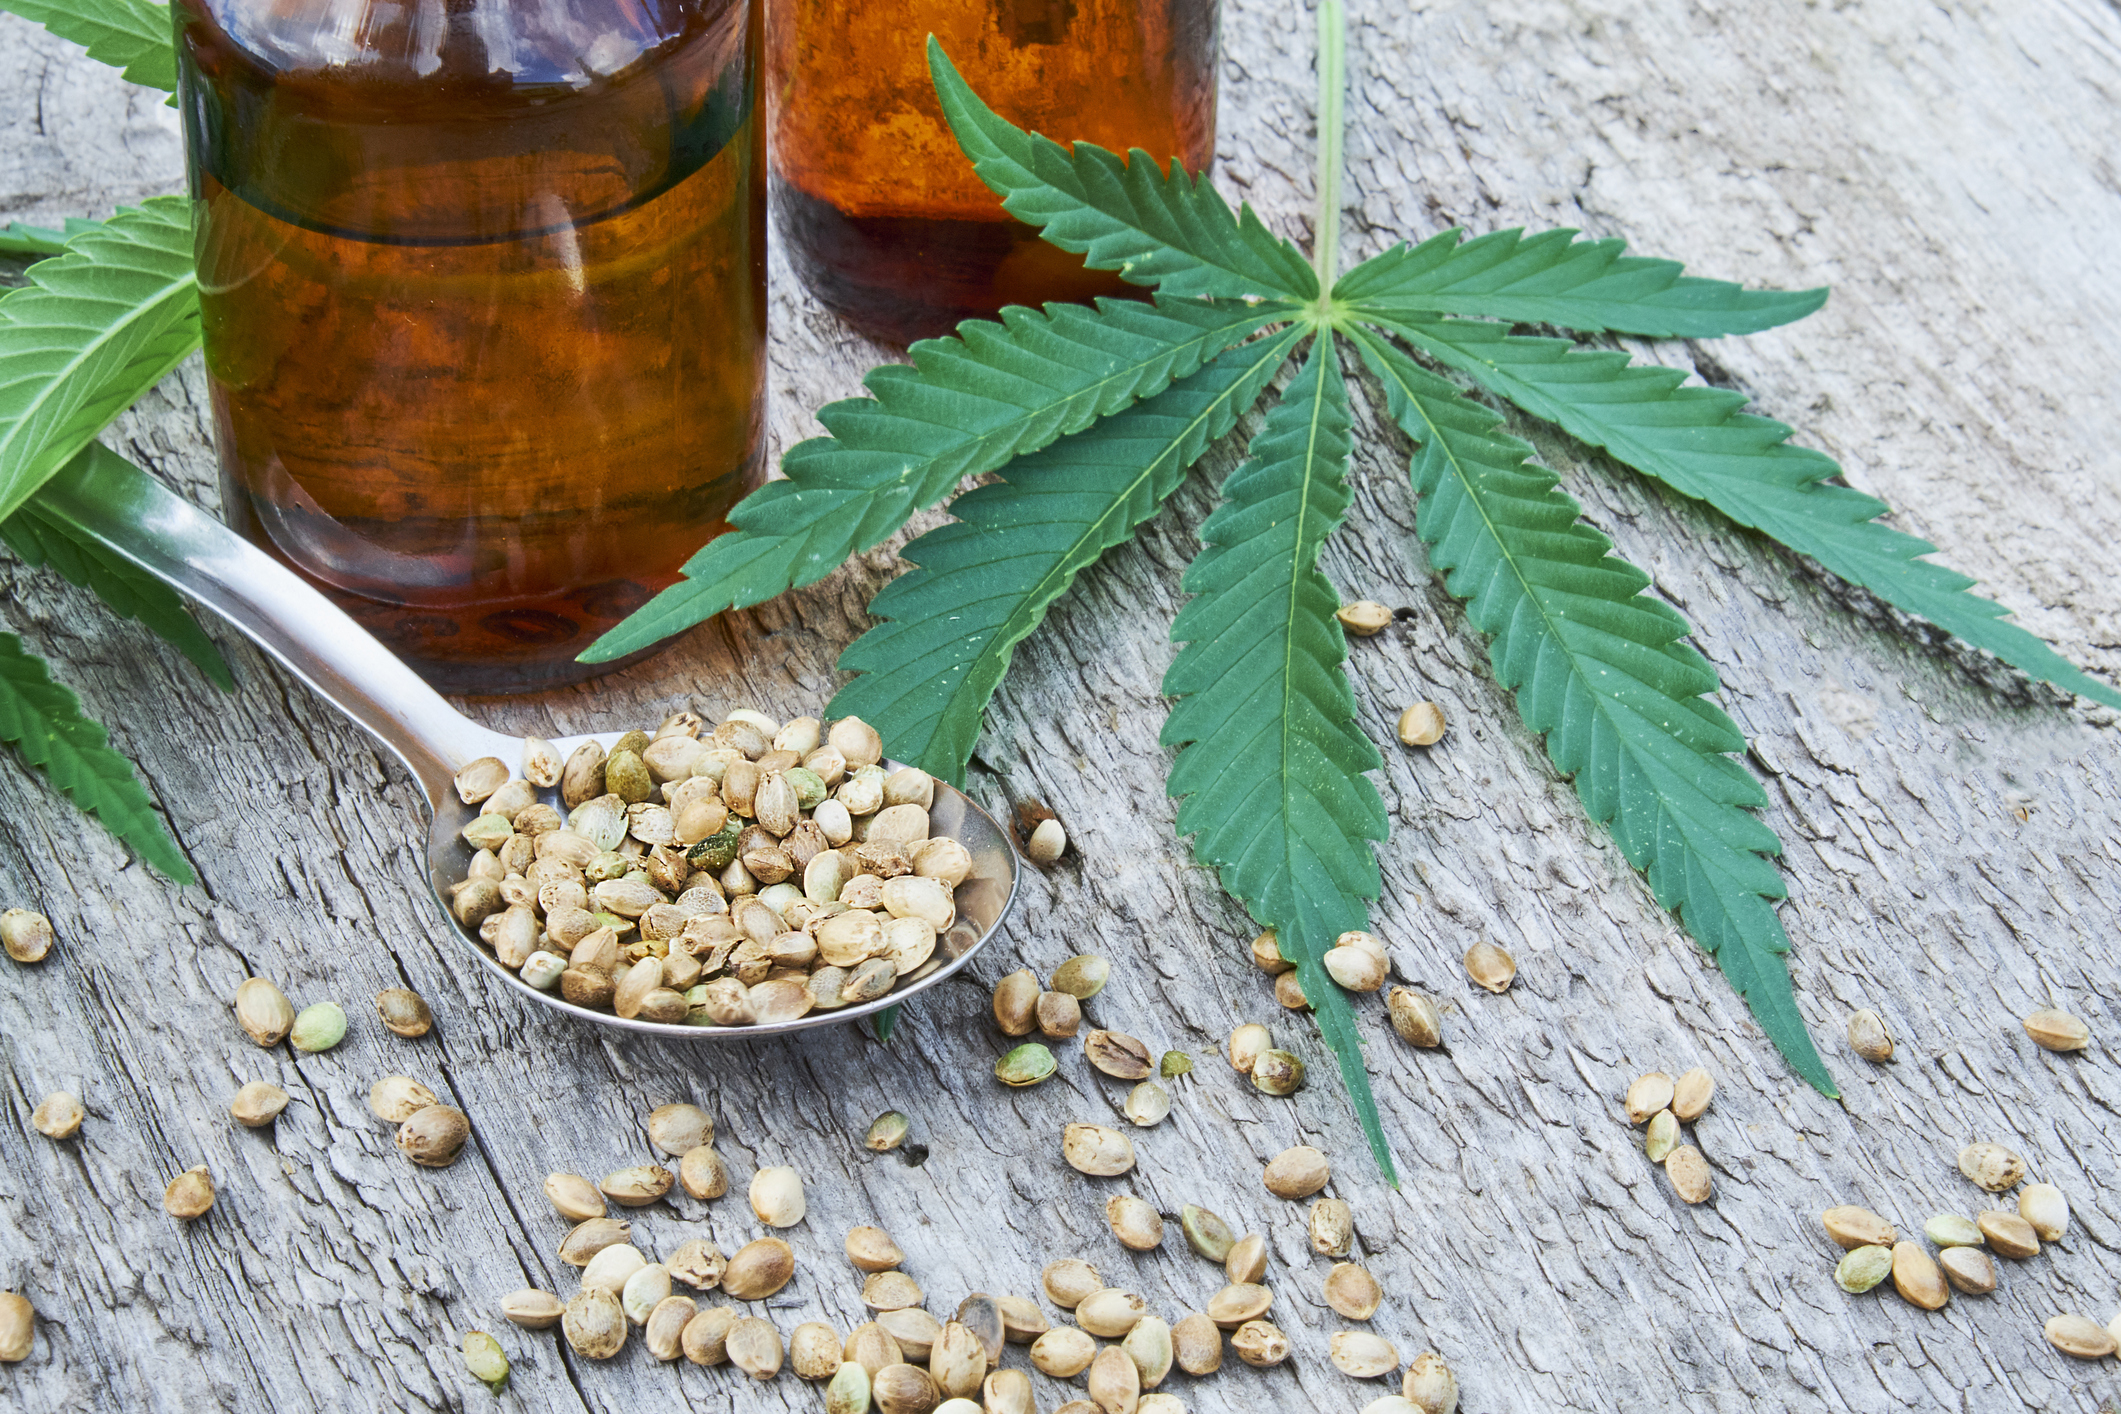 hemp leaves on wooden background, seeds, cannabis oil extracts in jars